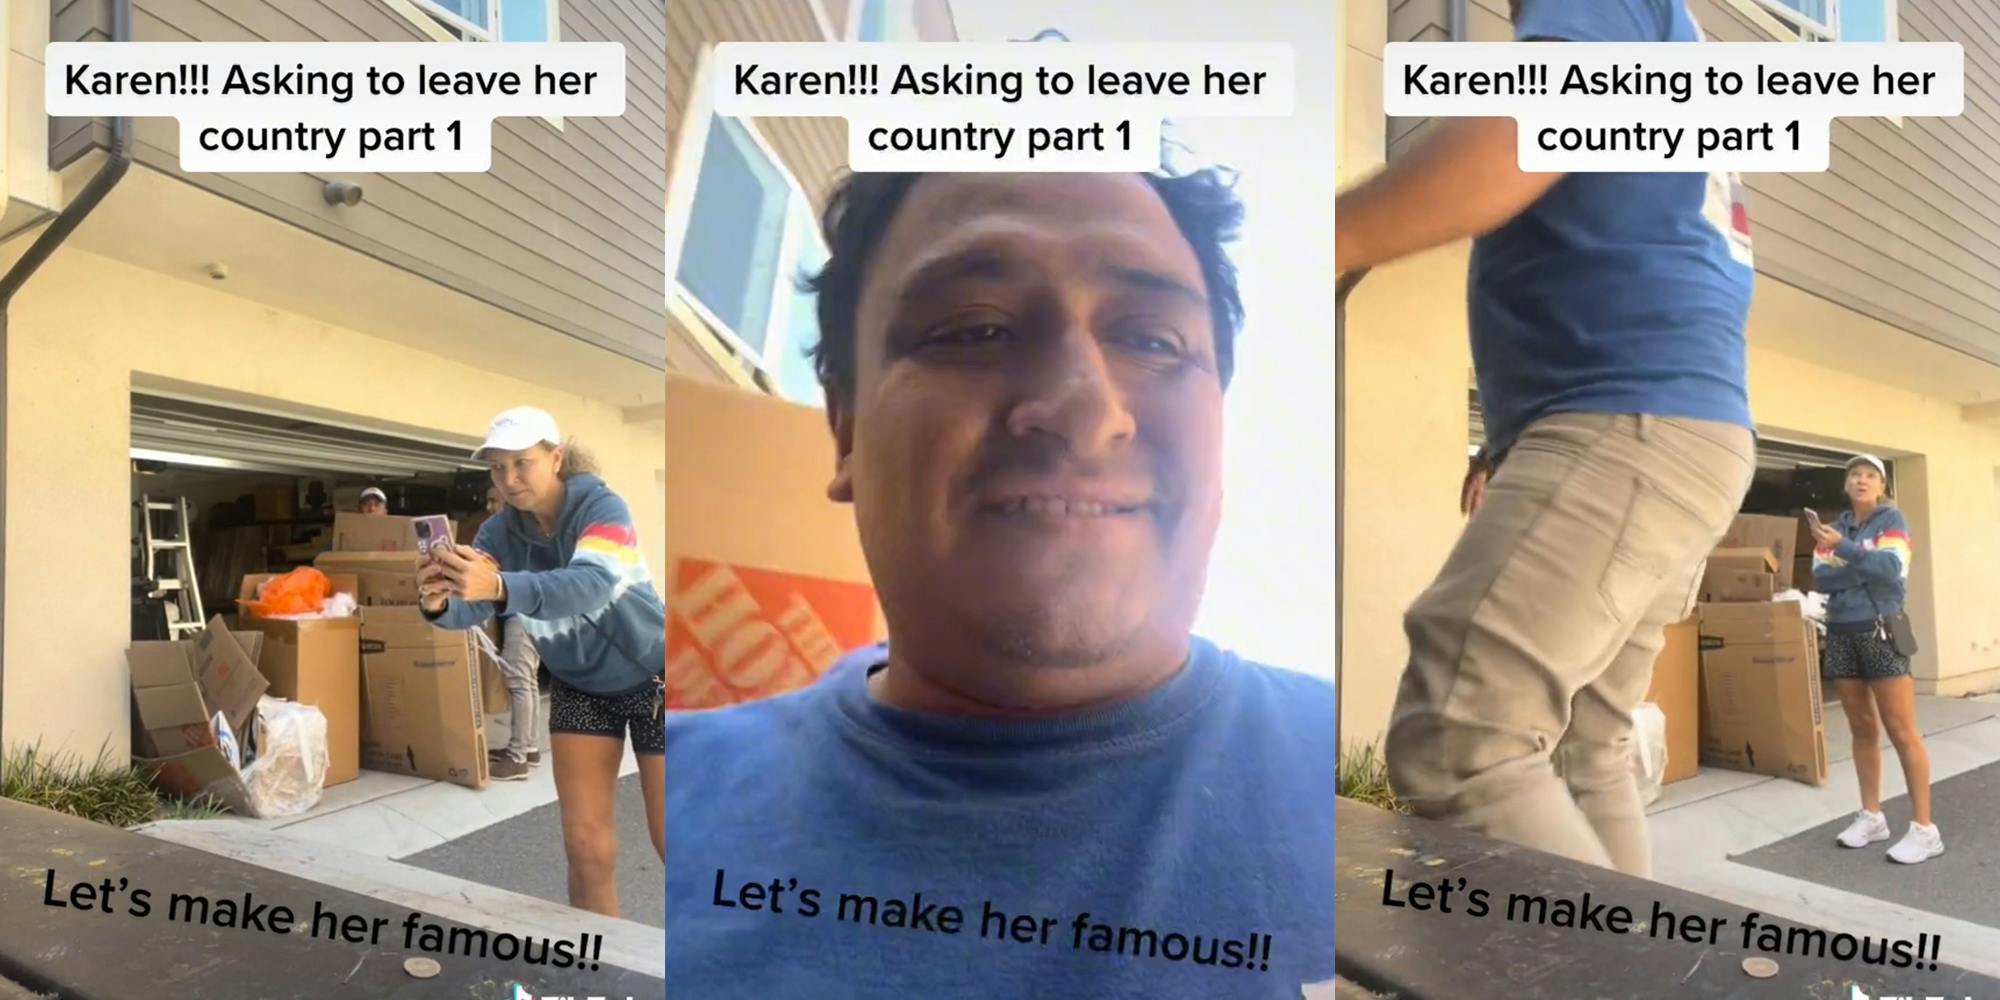 woman taking a picture with cardboard boxes in background (l) man smiling (c) woman standing behind man with phone in hand (r) all with captions "Karen!!! Asking to leave her country part 1" and "Let's make her famous!!"